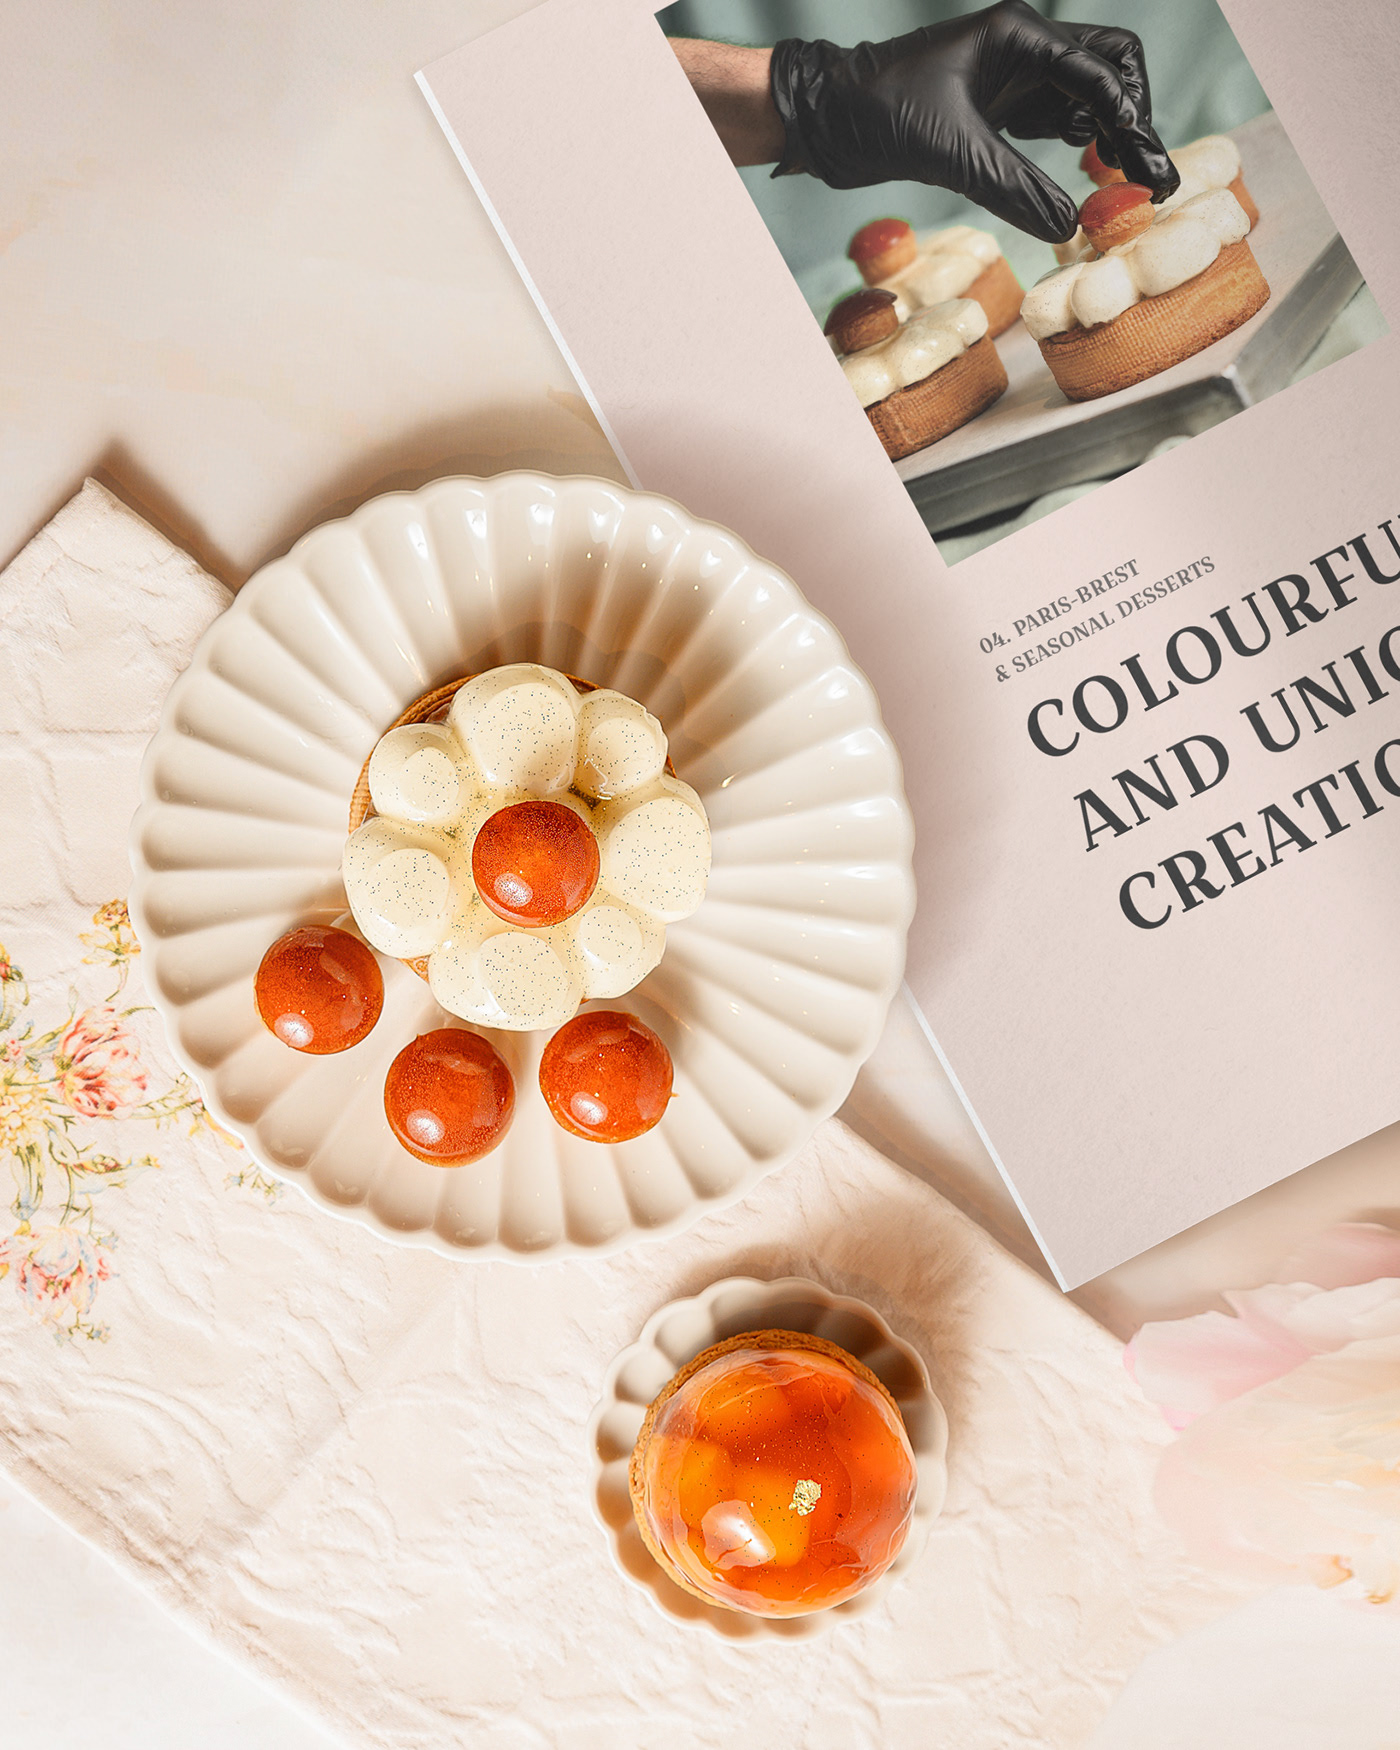 choureal lookbook with colourful desserts on table